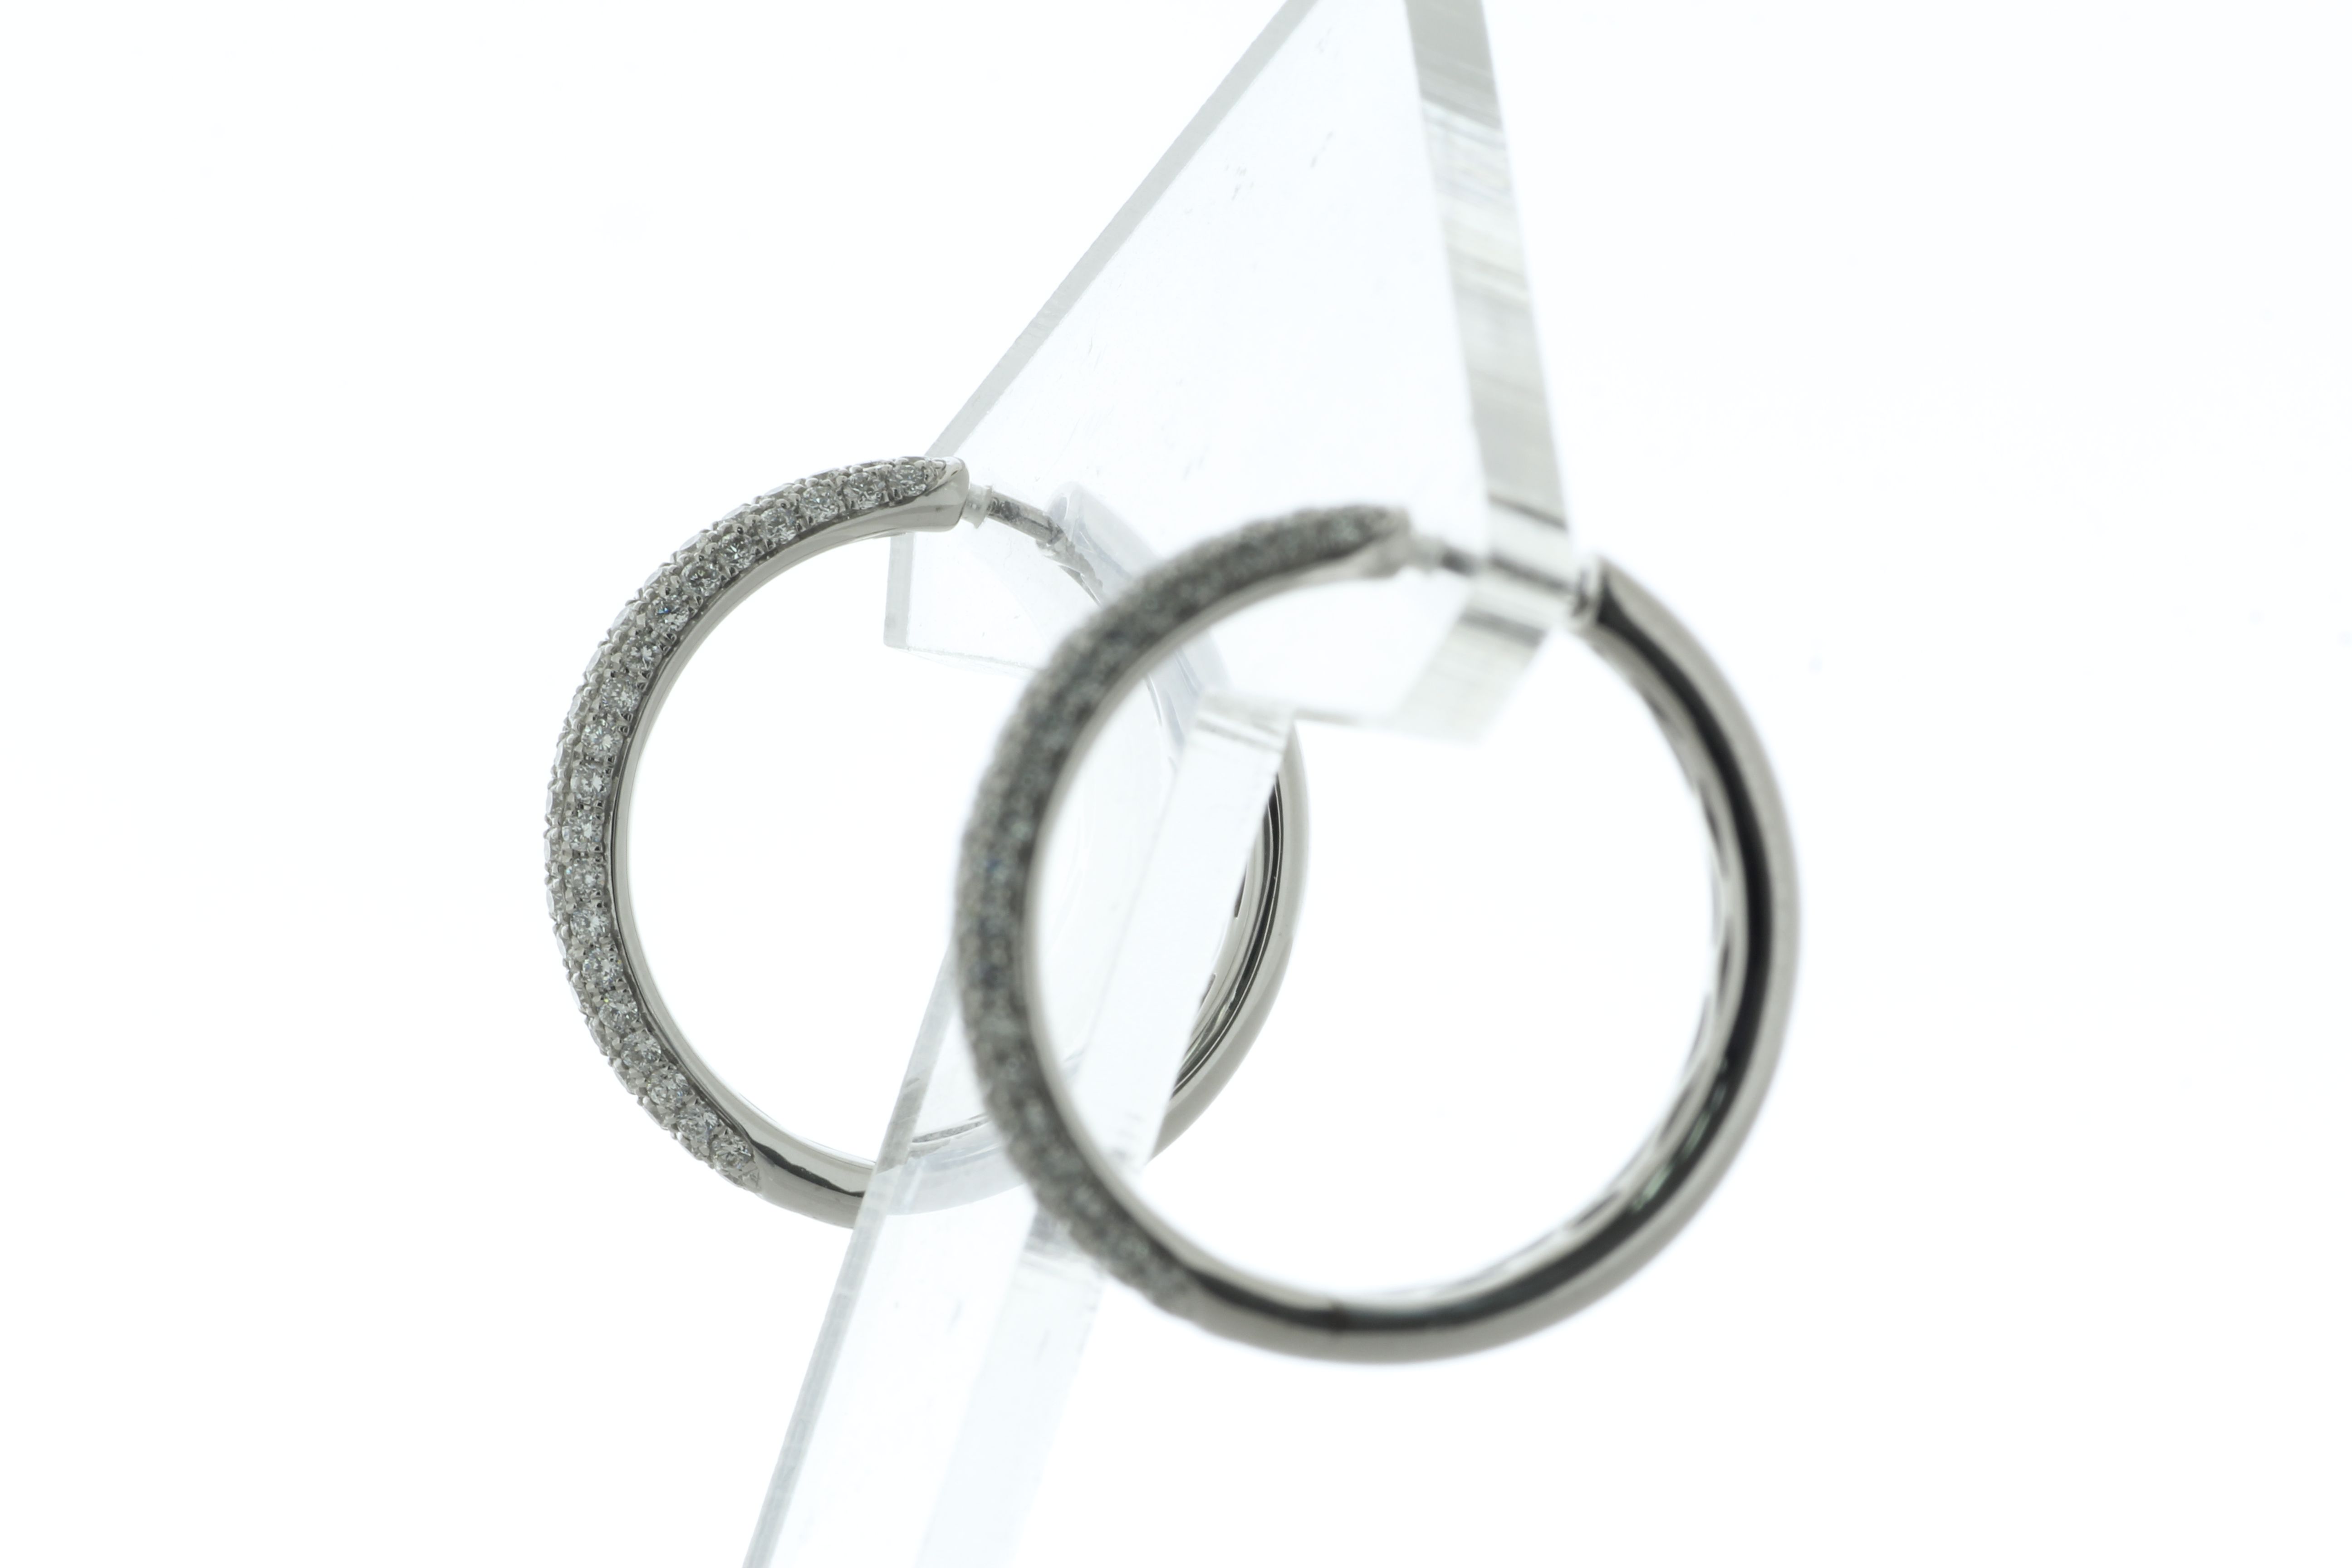 18ct White Gold Claw Set Hoop Diamond Earring 0.97 Carats - Image 3 of 4